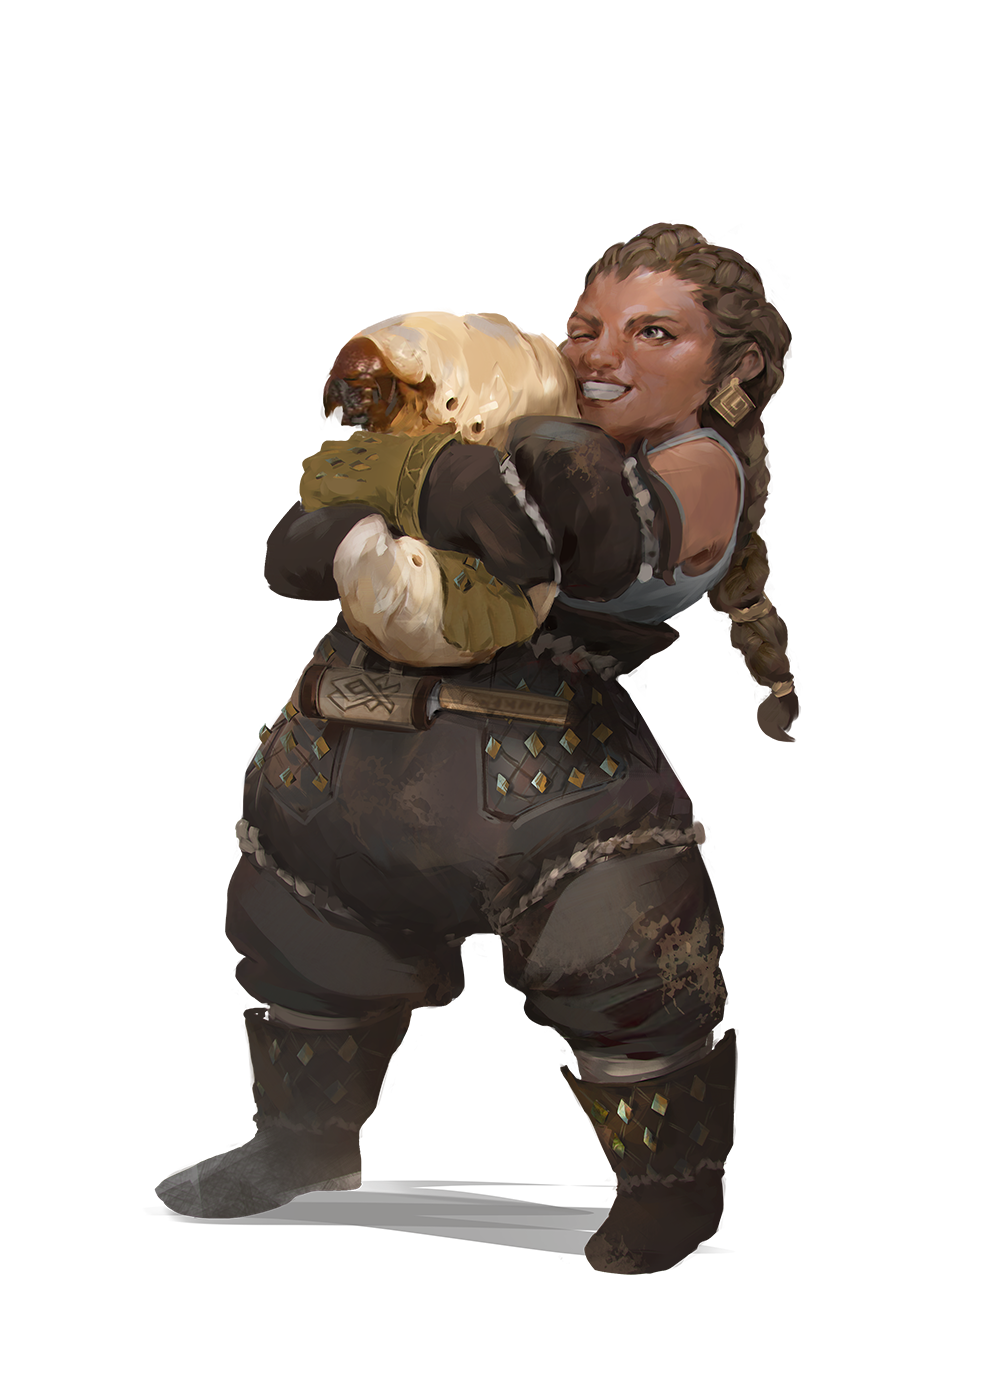 A dwarven woman with light skin is holding onto a grindlegrub, an enormous grub. She looks excited, the way someone does when holding a beloved pet.